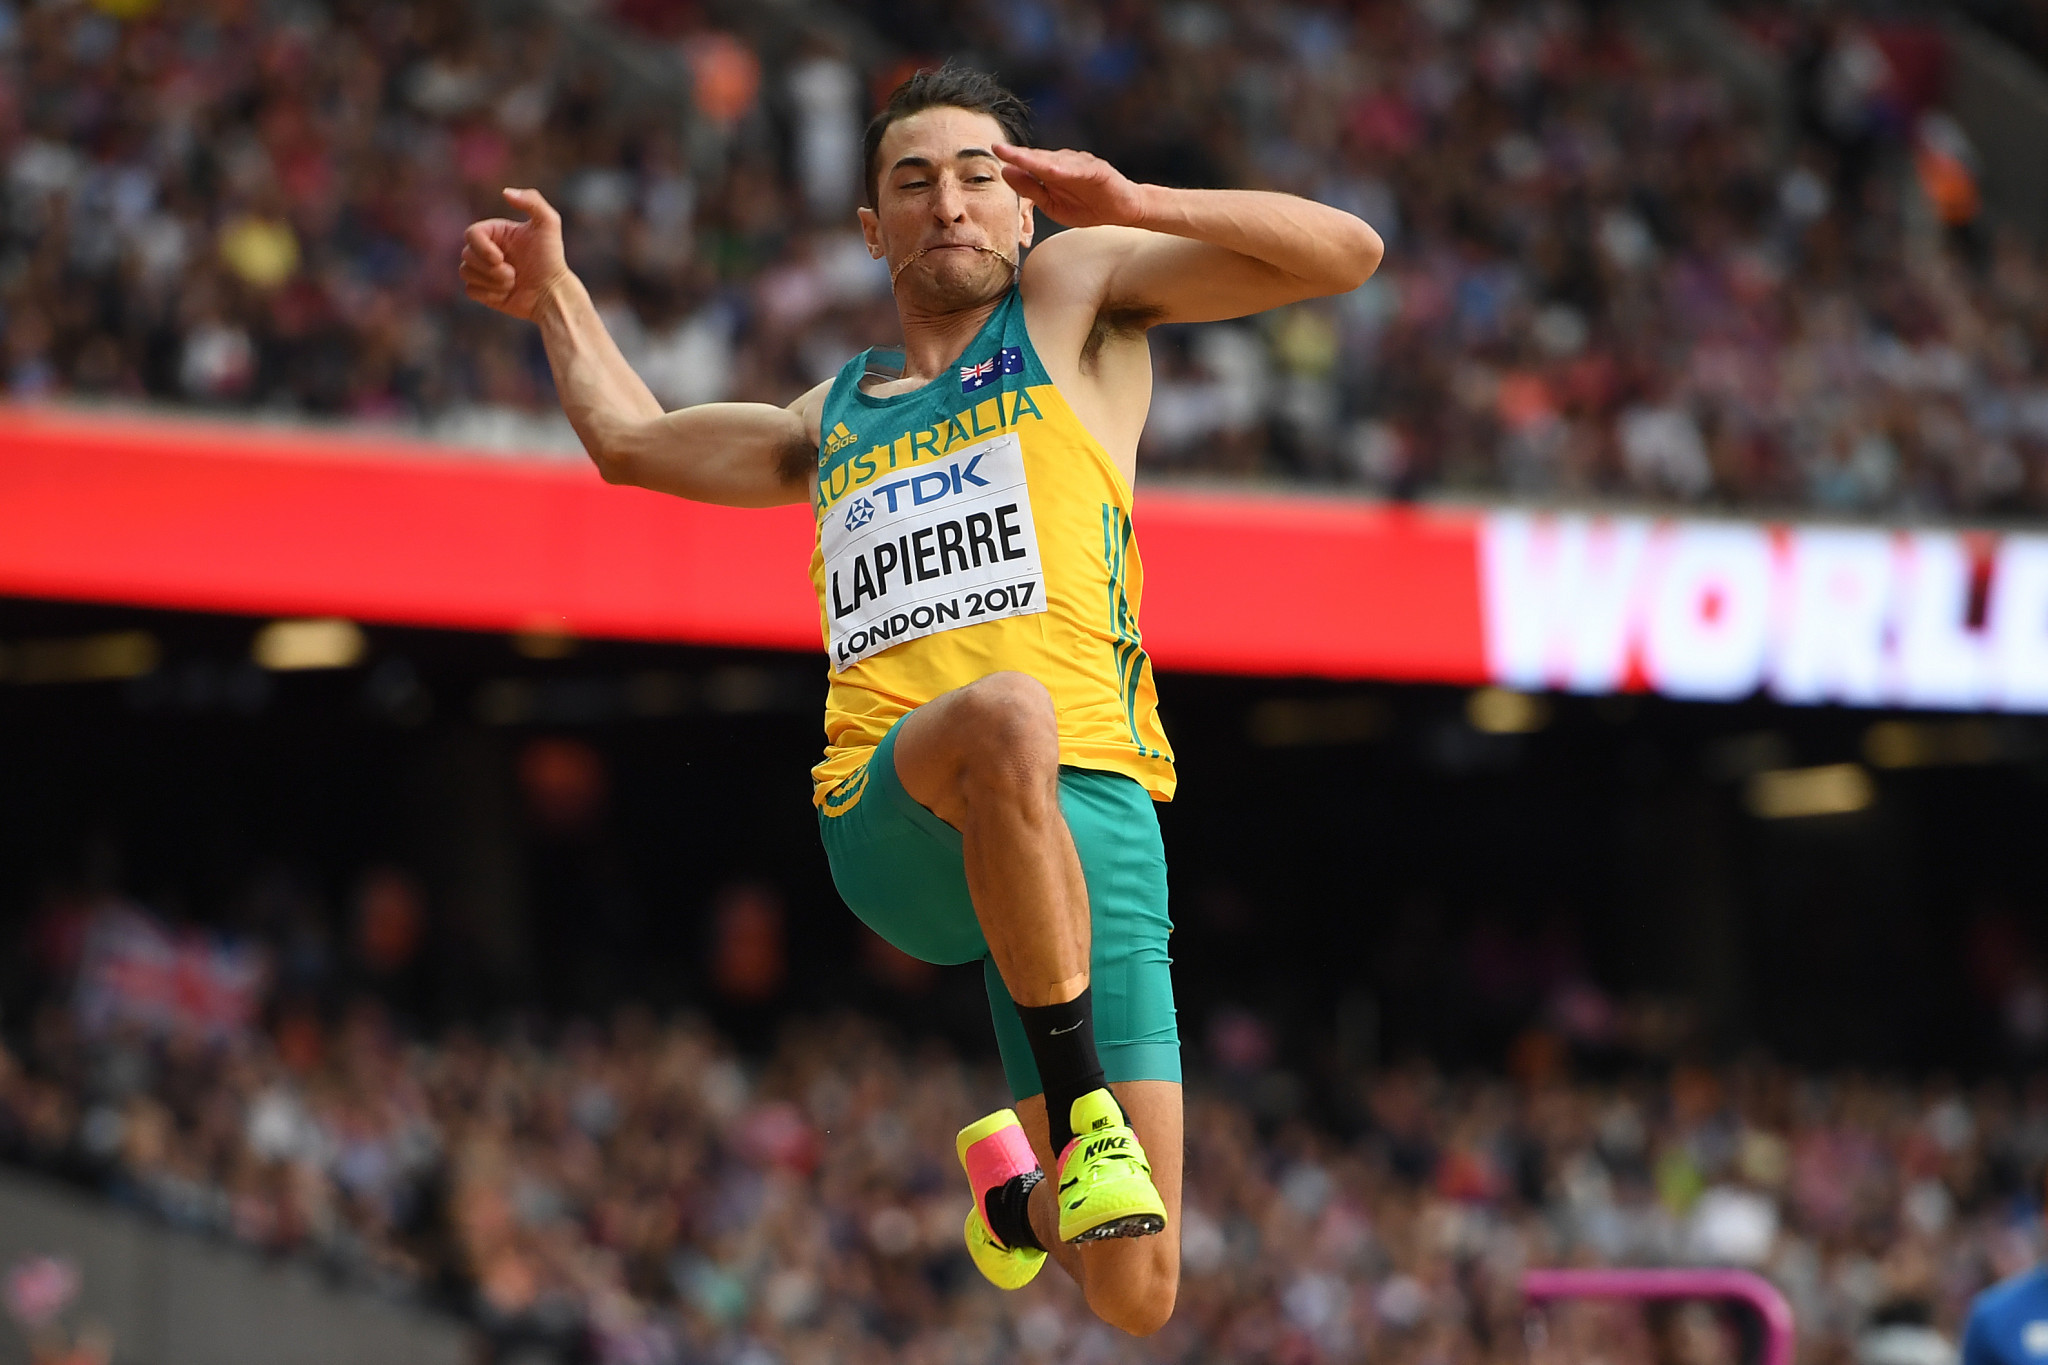 Long jumper Fabrice Lapierre is one of five athletes who are set to appear at their fourth Commonwealth Games ©Getty Images